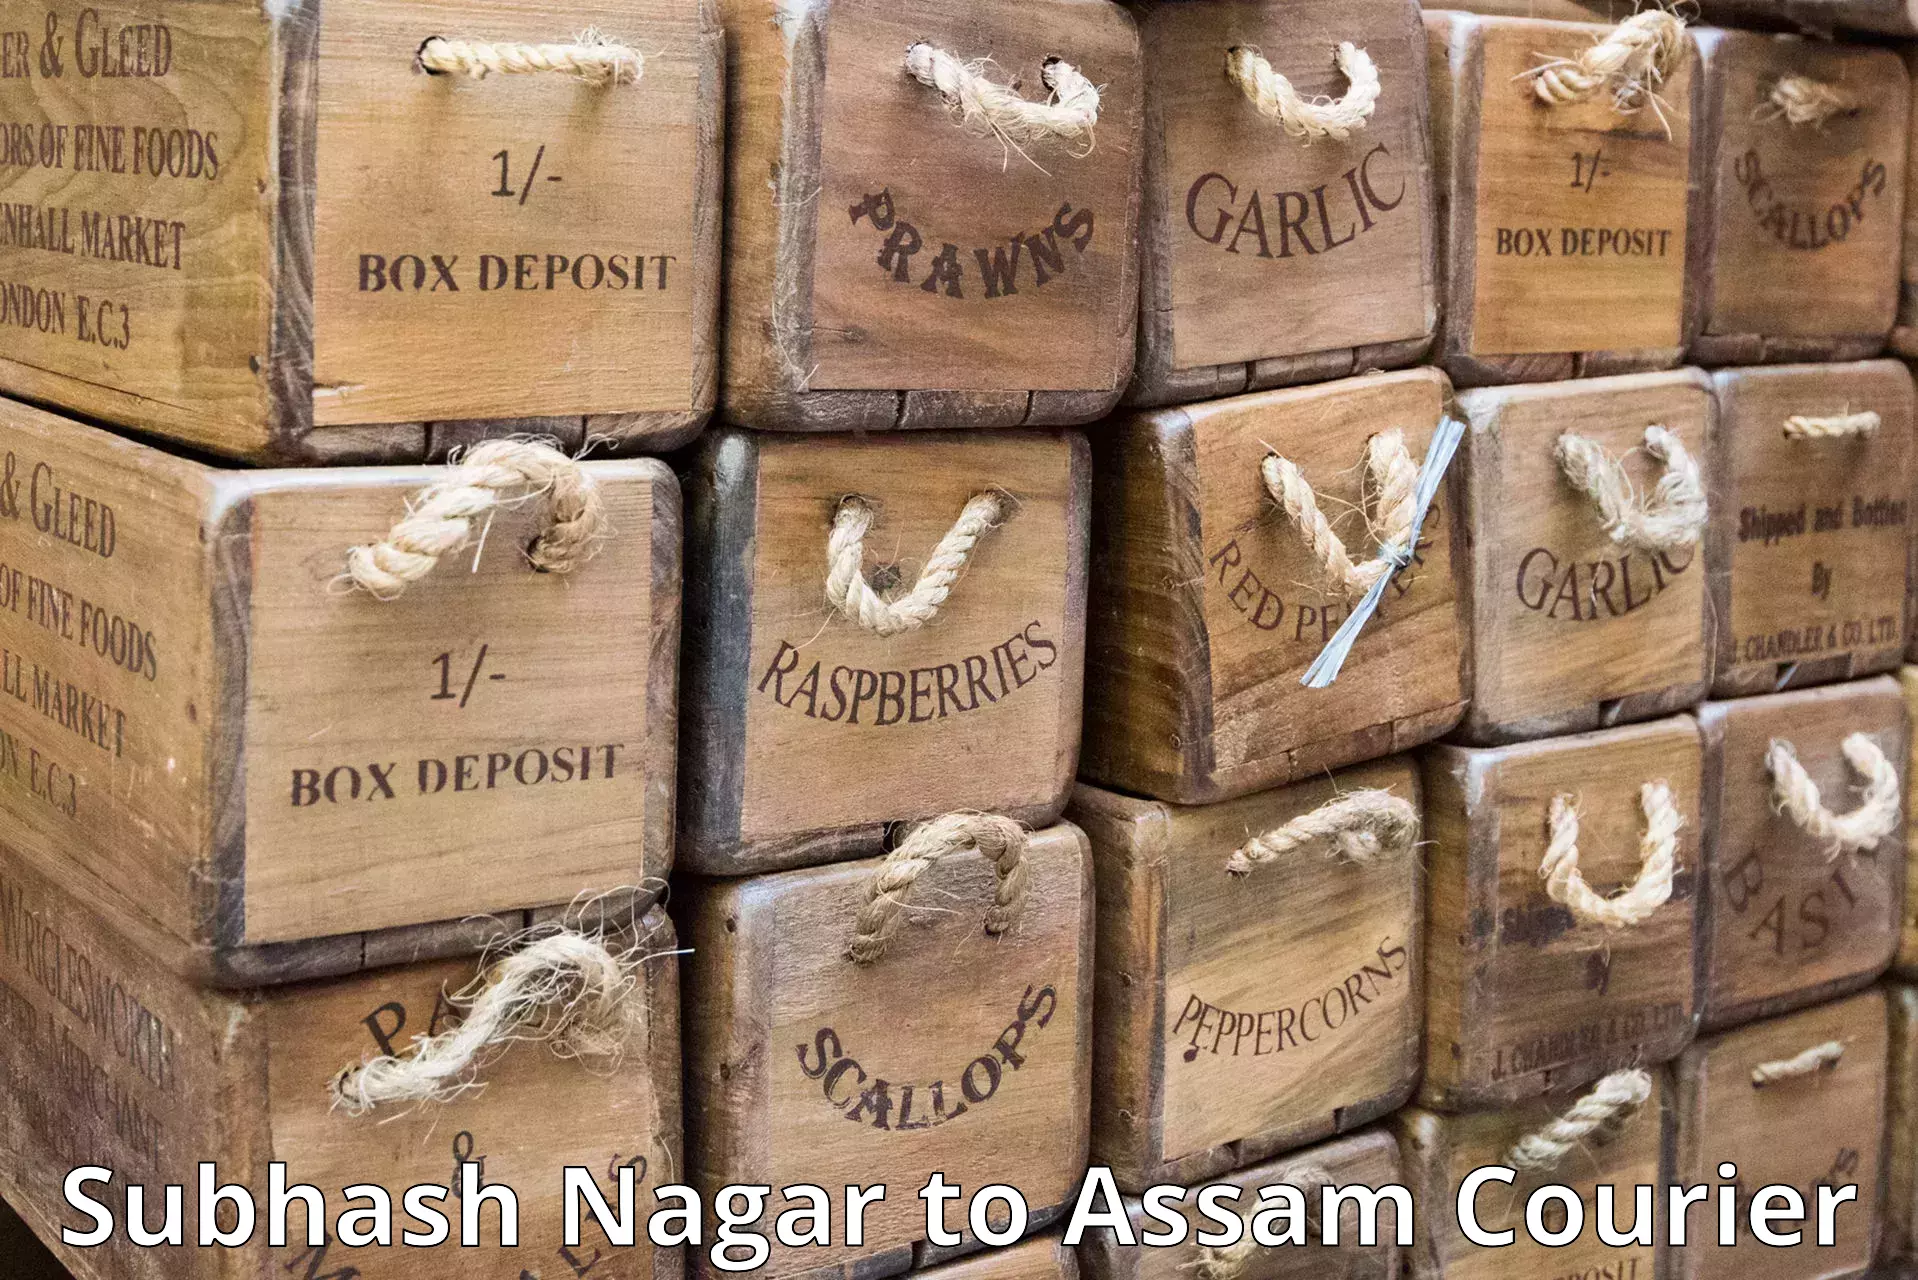 User-friendly delivery service Subhash Nagar to Assam